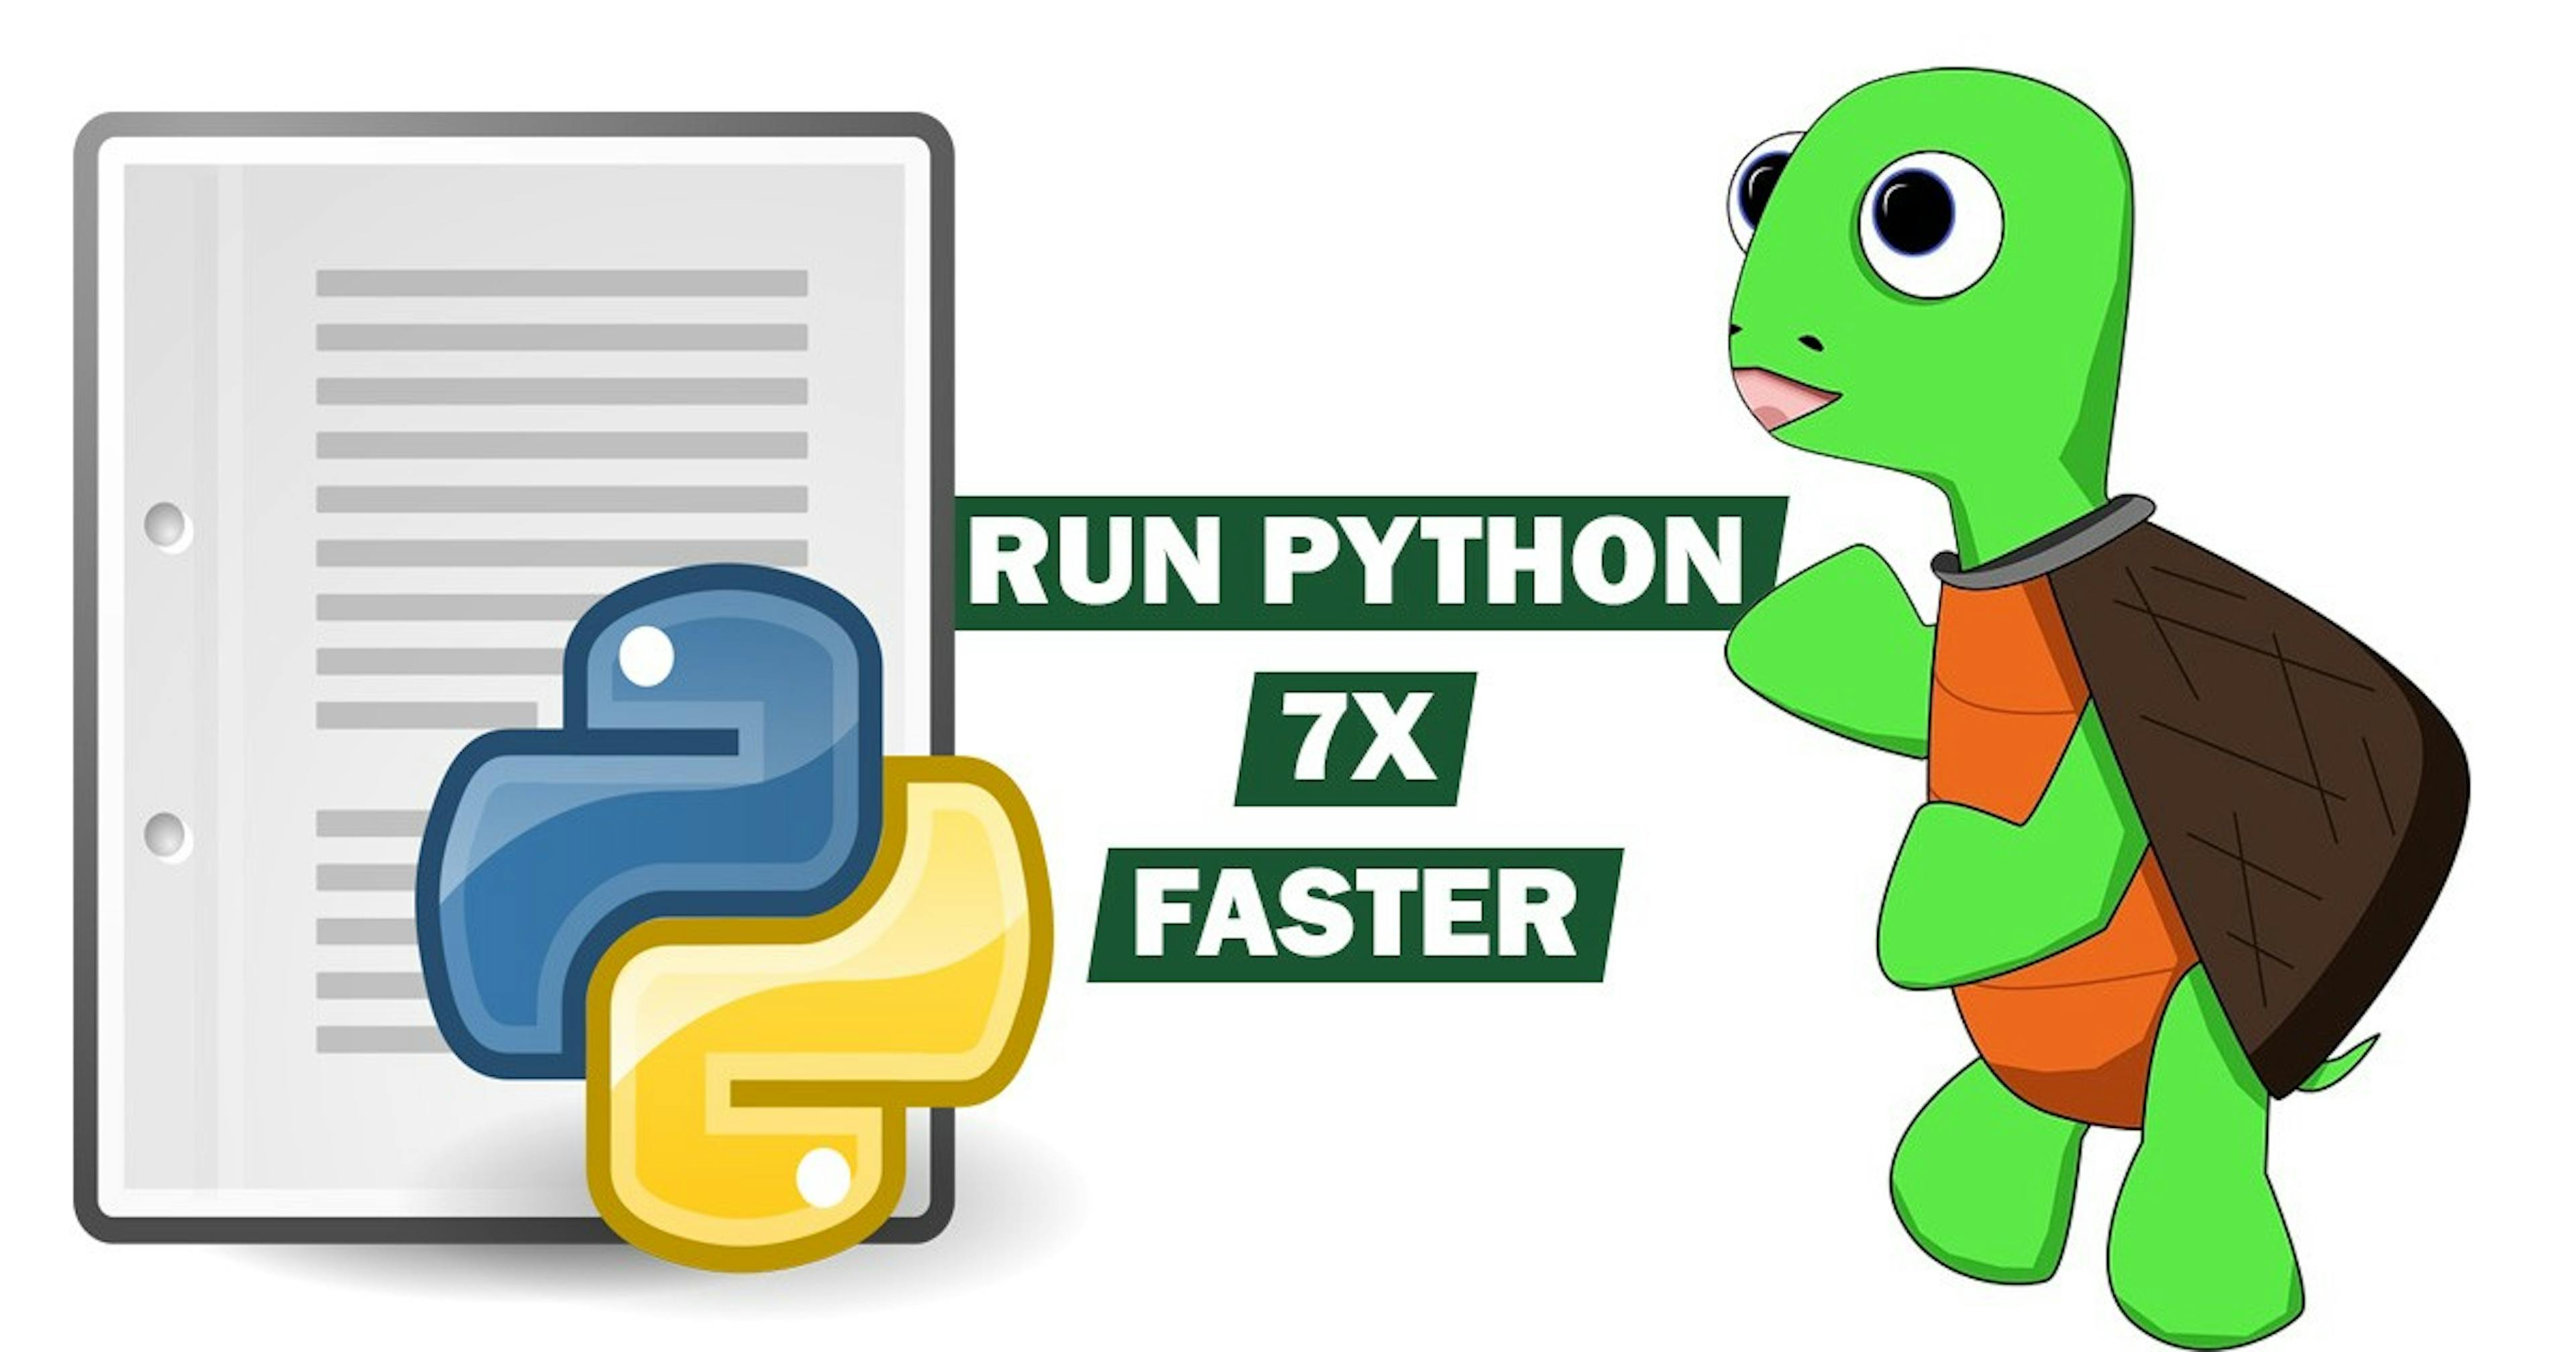 featured image - Are your Python programs running slow? Here’s how you can make them 7x faster.